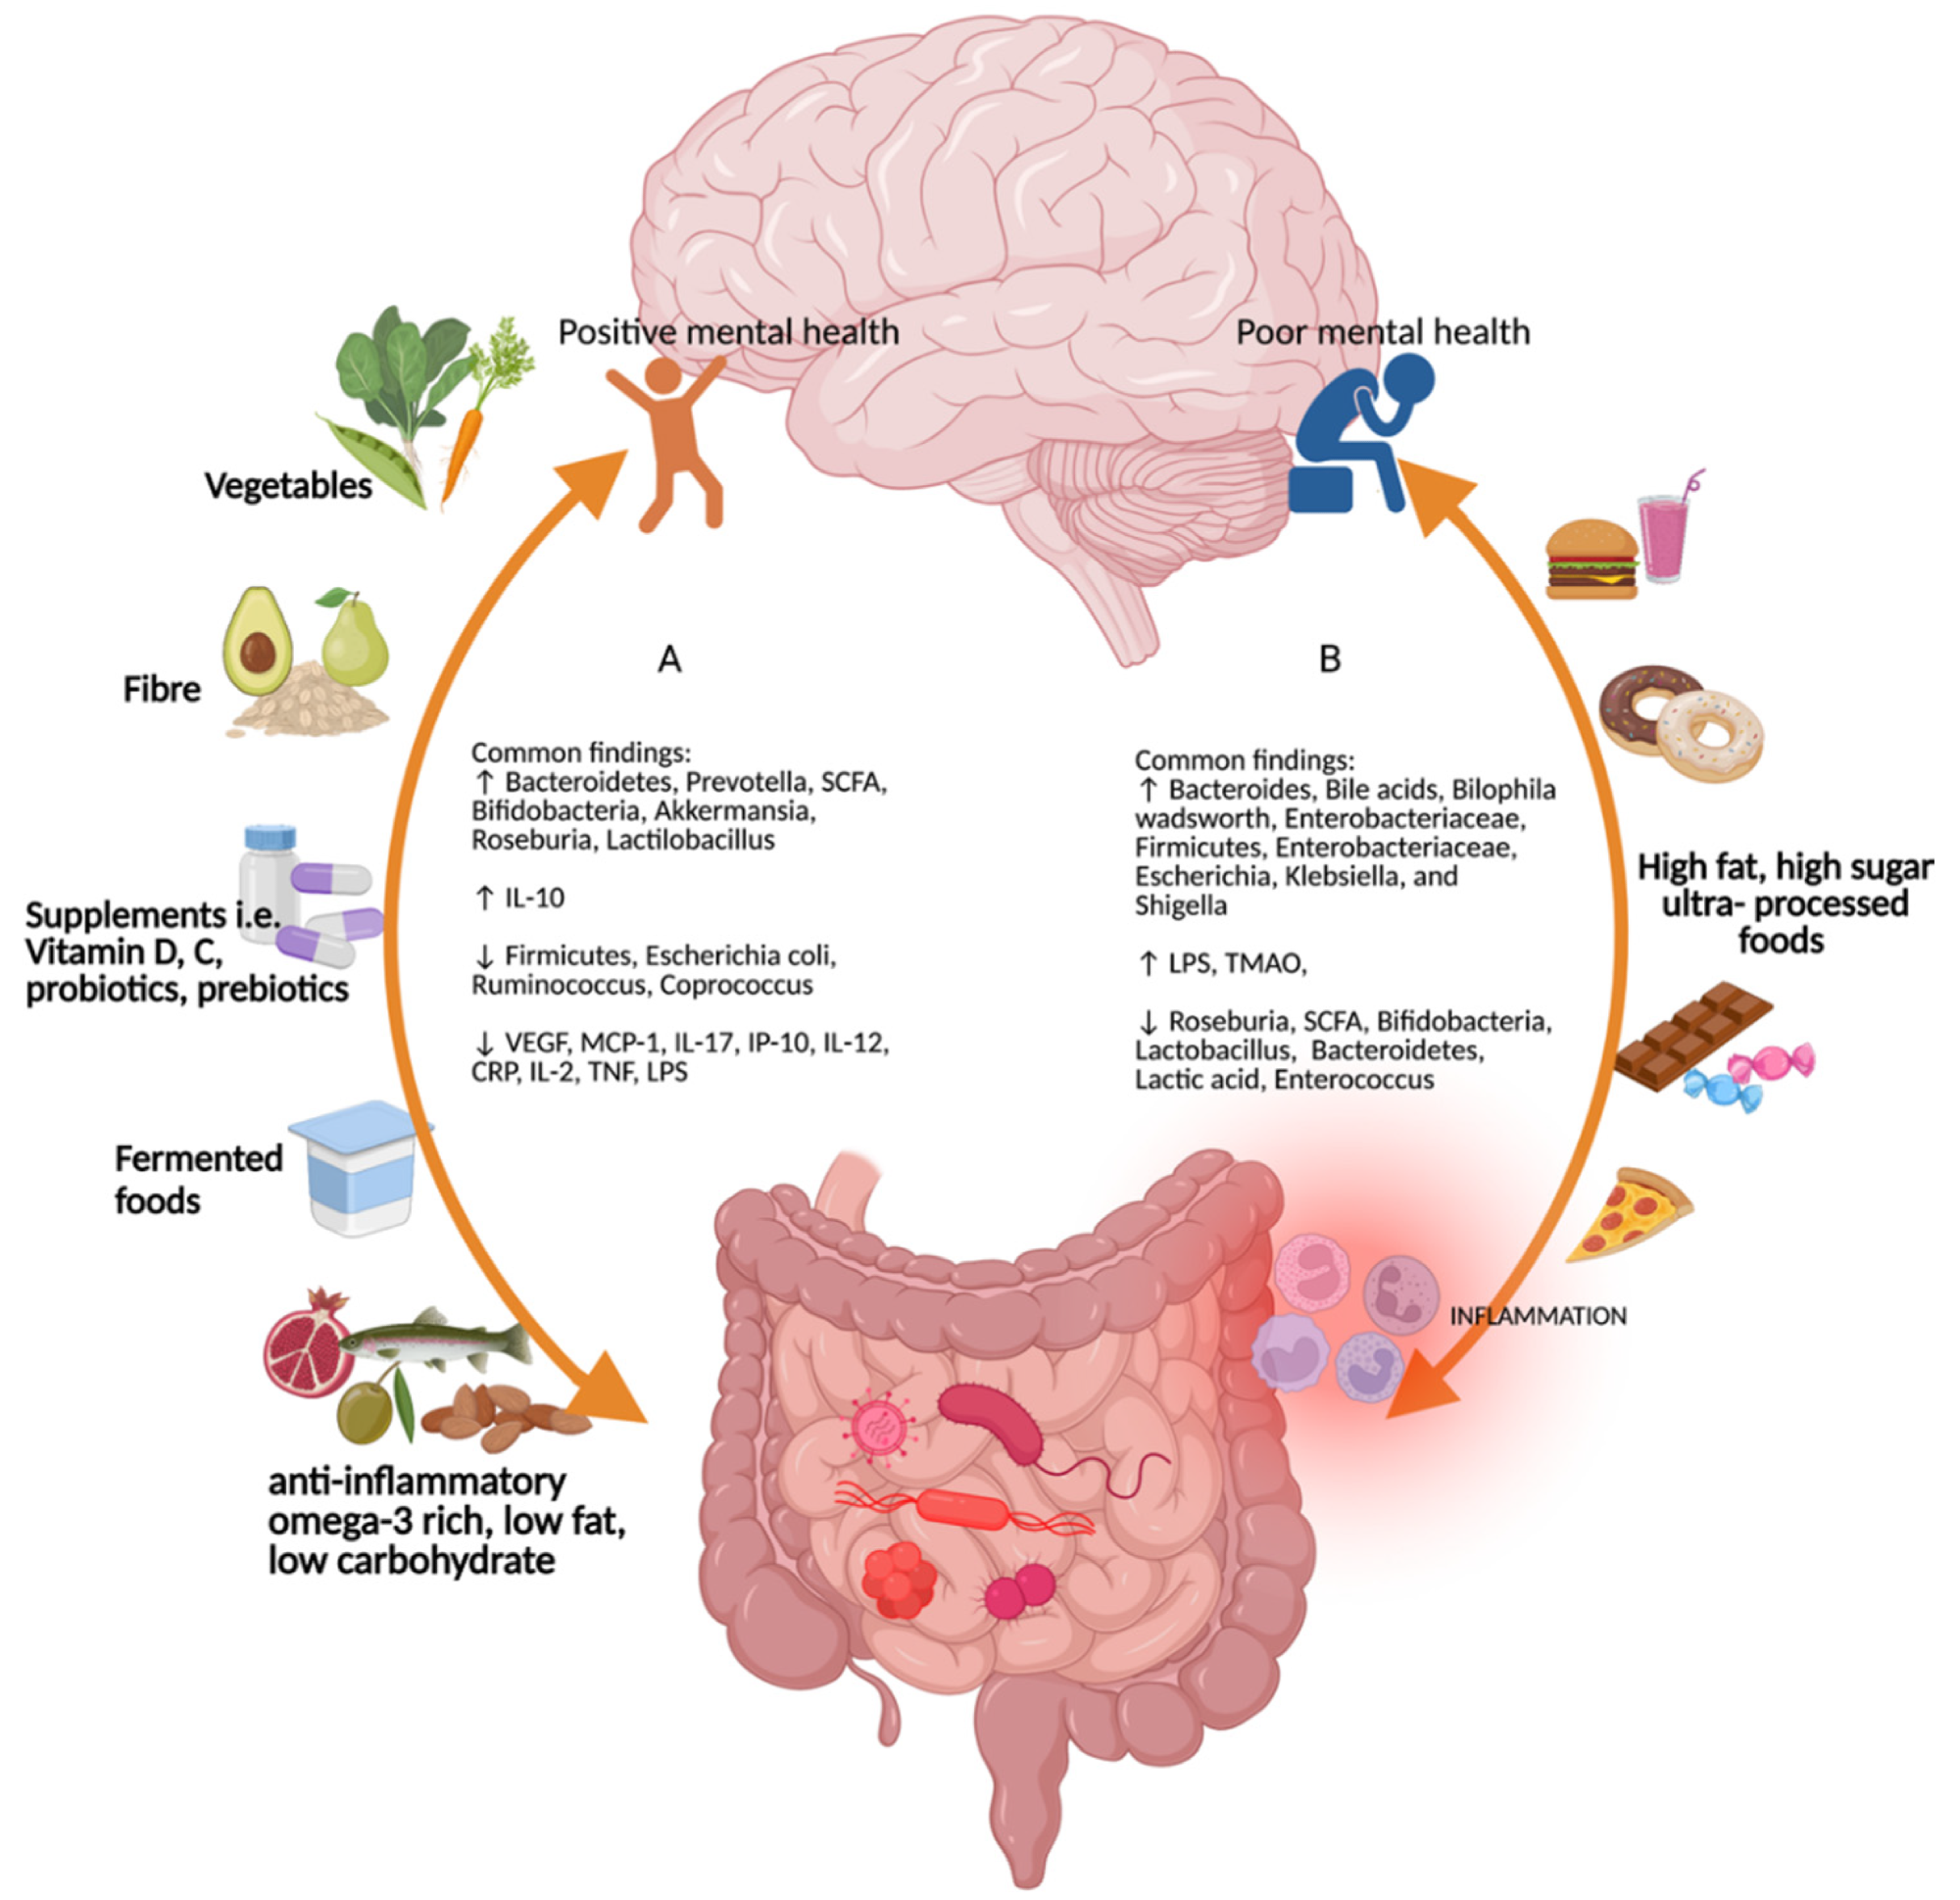 Common findings for the different types of diet on the gut–brain–microbiome axis.  (A) Diets rich in vegetables, fiber, micronutrients such as vitamins D and C, probiotics and prebiotics, fermented foods, anti-inflammatory omega-3-rich, low-fat, and low-carbohydrate foods promote positive mental health and increases in Bacteroidetes, Prevotella, short-chain fatty acids, Bifodobacteria, Akkermansia, Roseburia, Lactilobacillus, and interleukin (IL)-10, and decreases in Firmicutes, Escherichia coli, Ruminococcus, Coprococcus, vascular endothelial growth factor, monocyte chemoattractant protein-1, interferon gamma-induced protein 10, IL-17, IL-12, c-reactive protein, IL-2, tumor necrosis factor, and lipopolysaccharide.  (B) High-fat, high-sugar, and ultra-processed foods increase Bacteroides, bile acids, Bilophila wadsworth, Enterobacteriaceae, Firmicutes, Enterobacteriaceae, Escherichia, Klebsiella, and Shigella.  Figure created with Biorender (accessed on April 29, 2022).